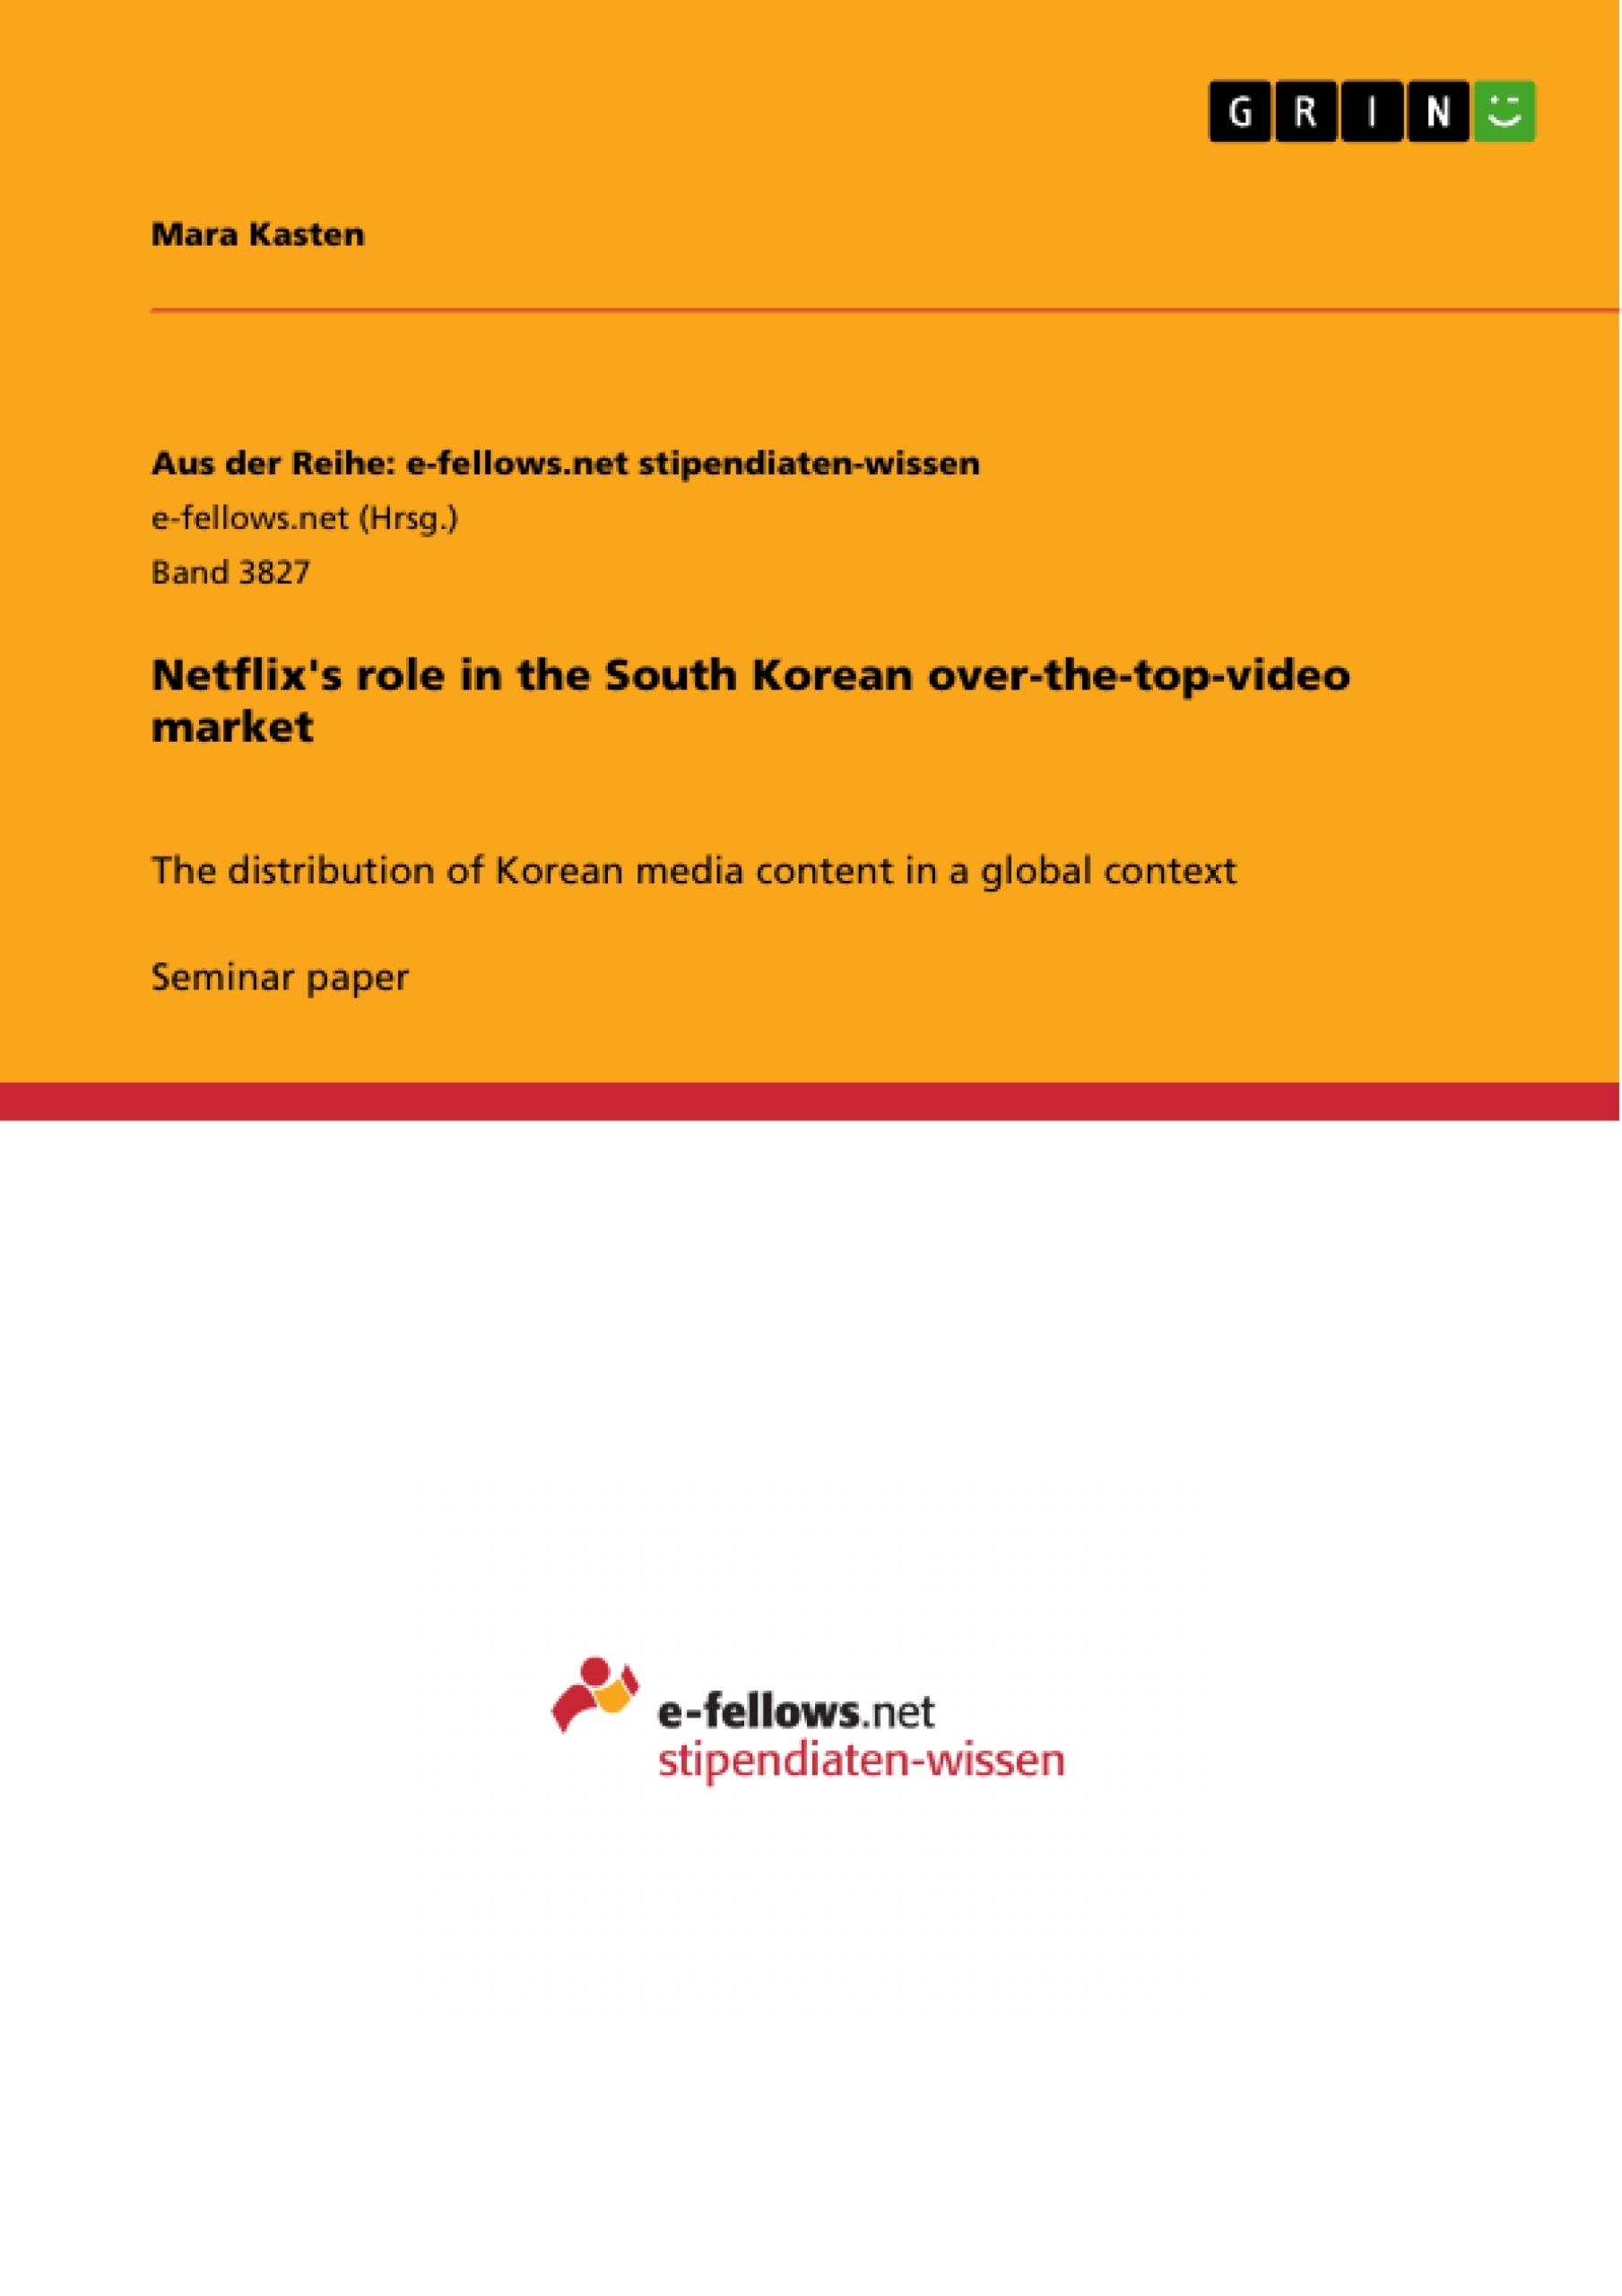 Title: Netflix's role in the South Korean over-the-top-video market